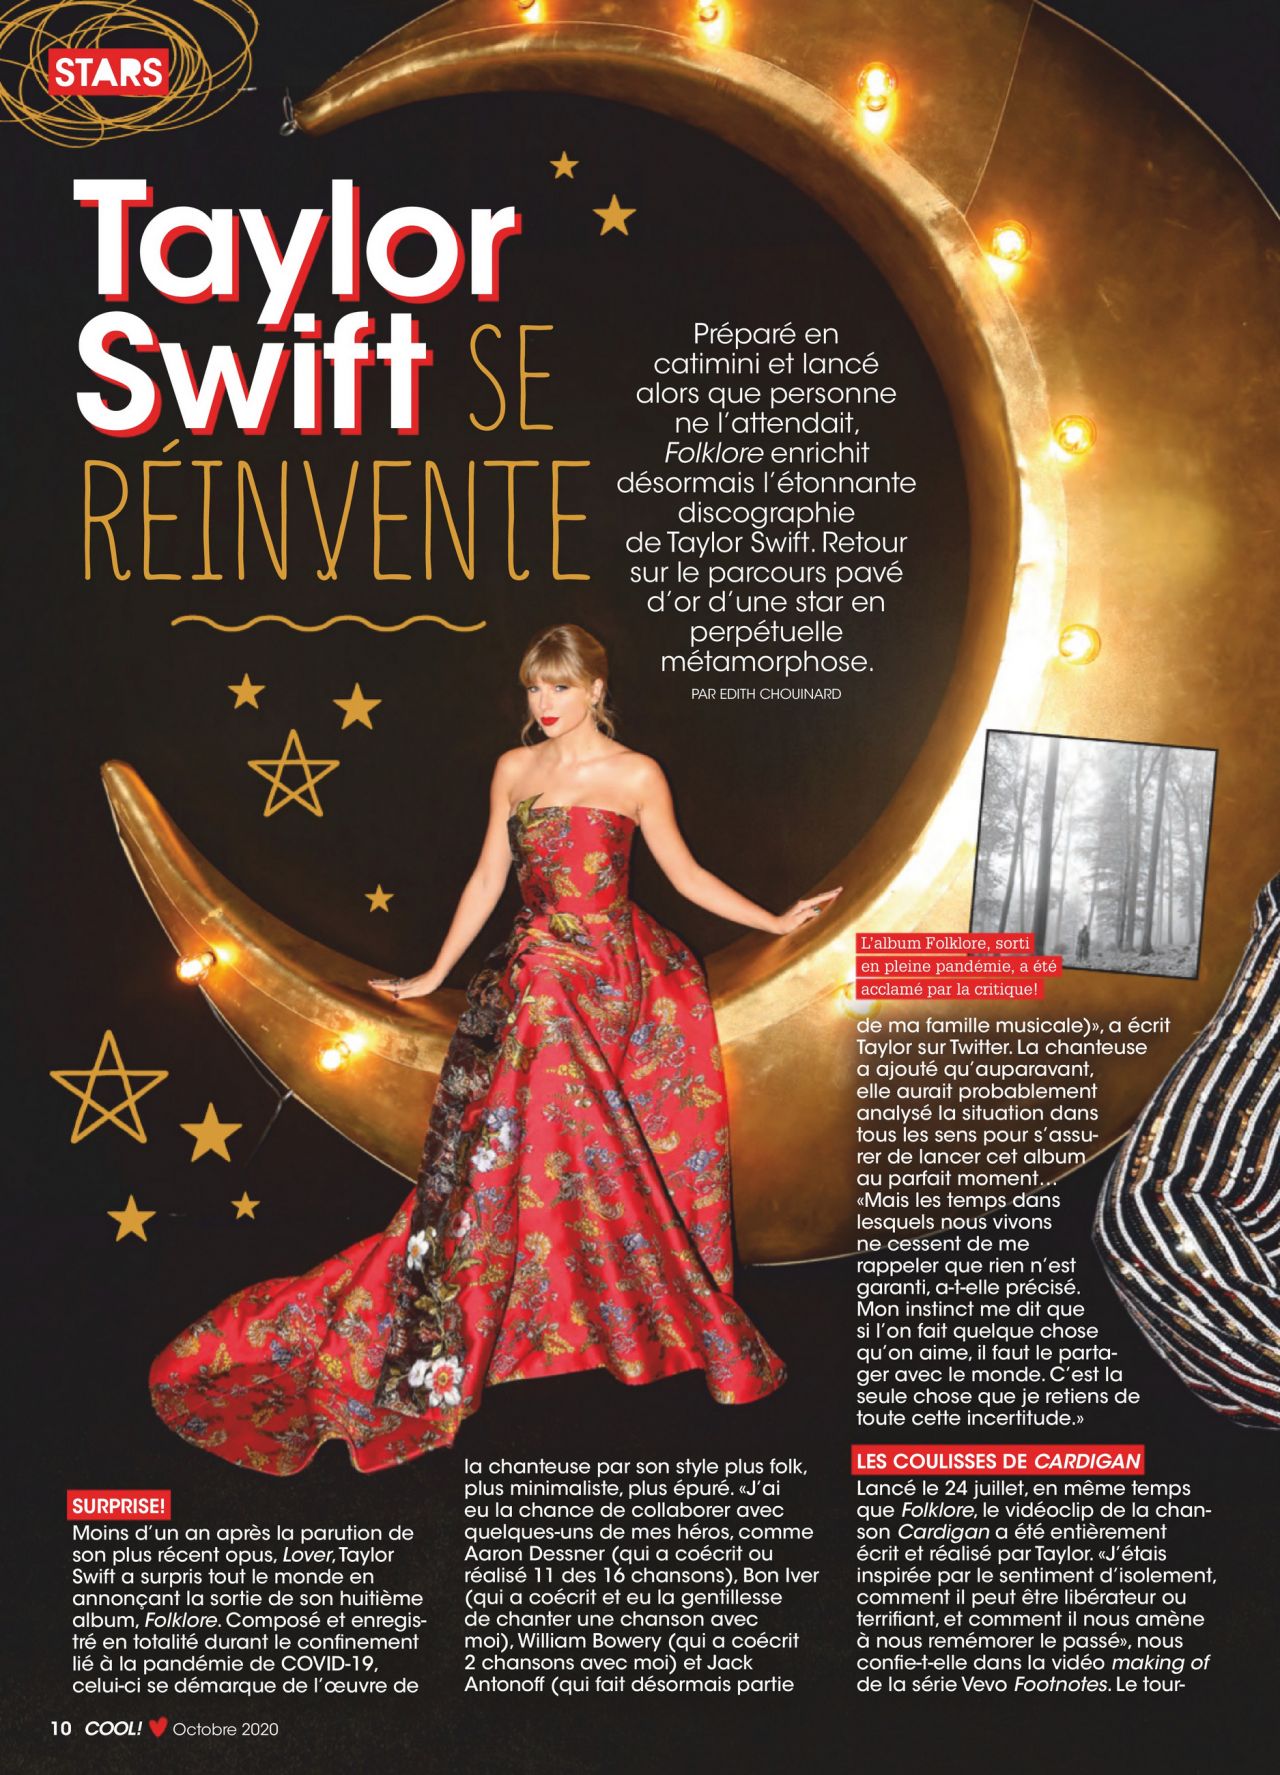 taylor-swift-cool-canada-october-2020-issue-1.jpg